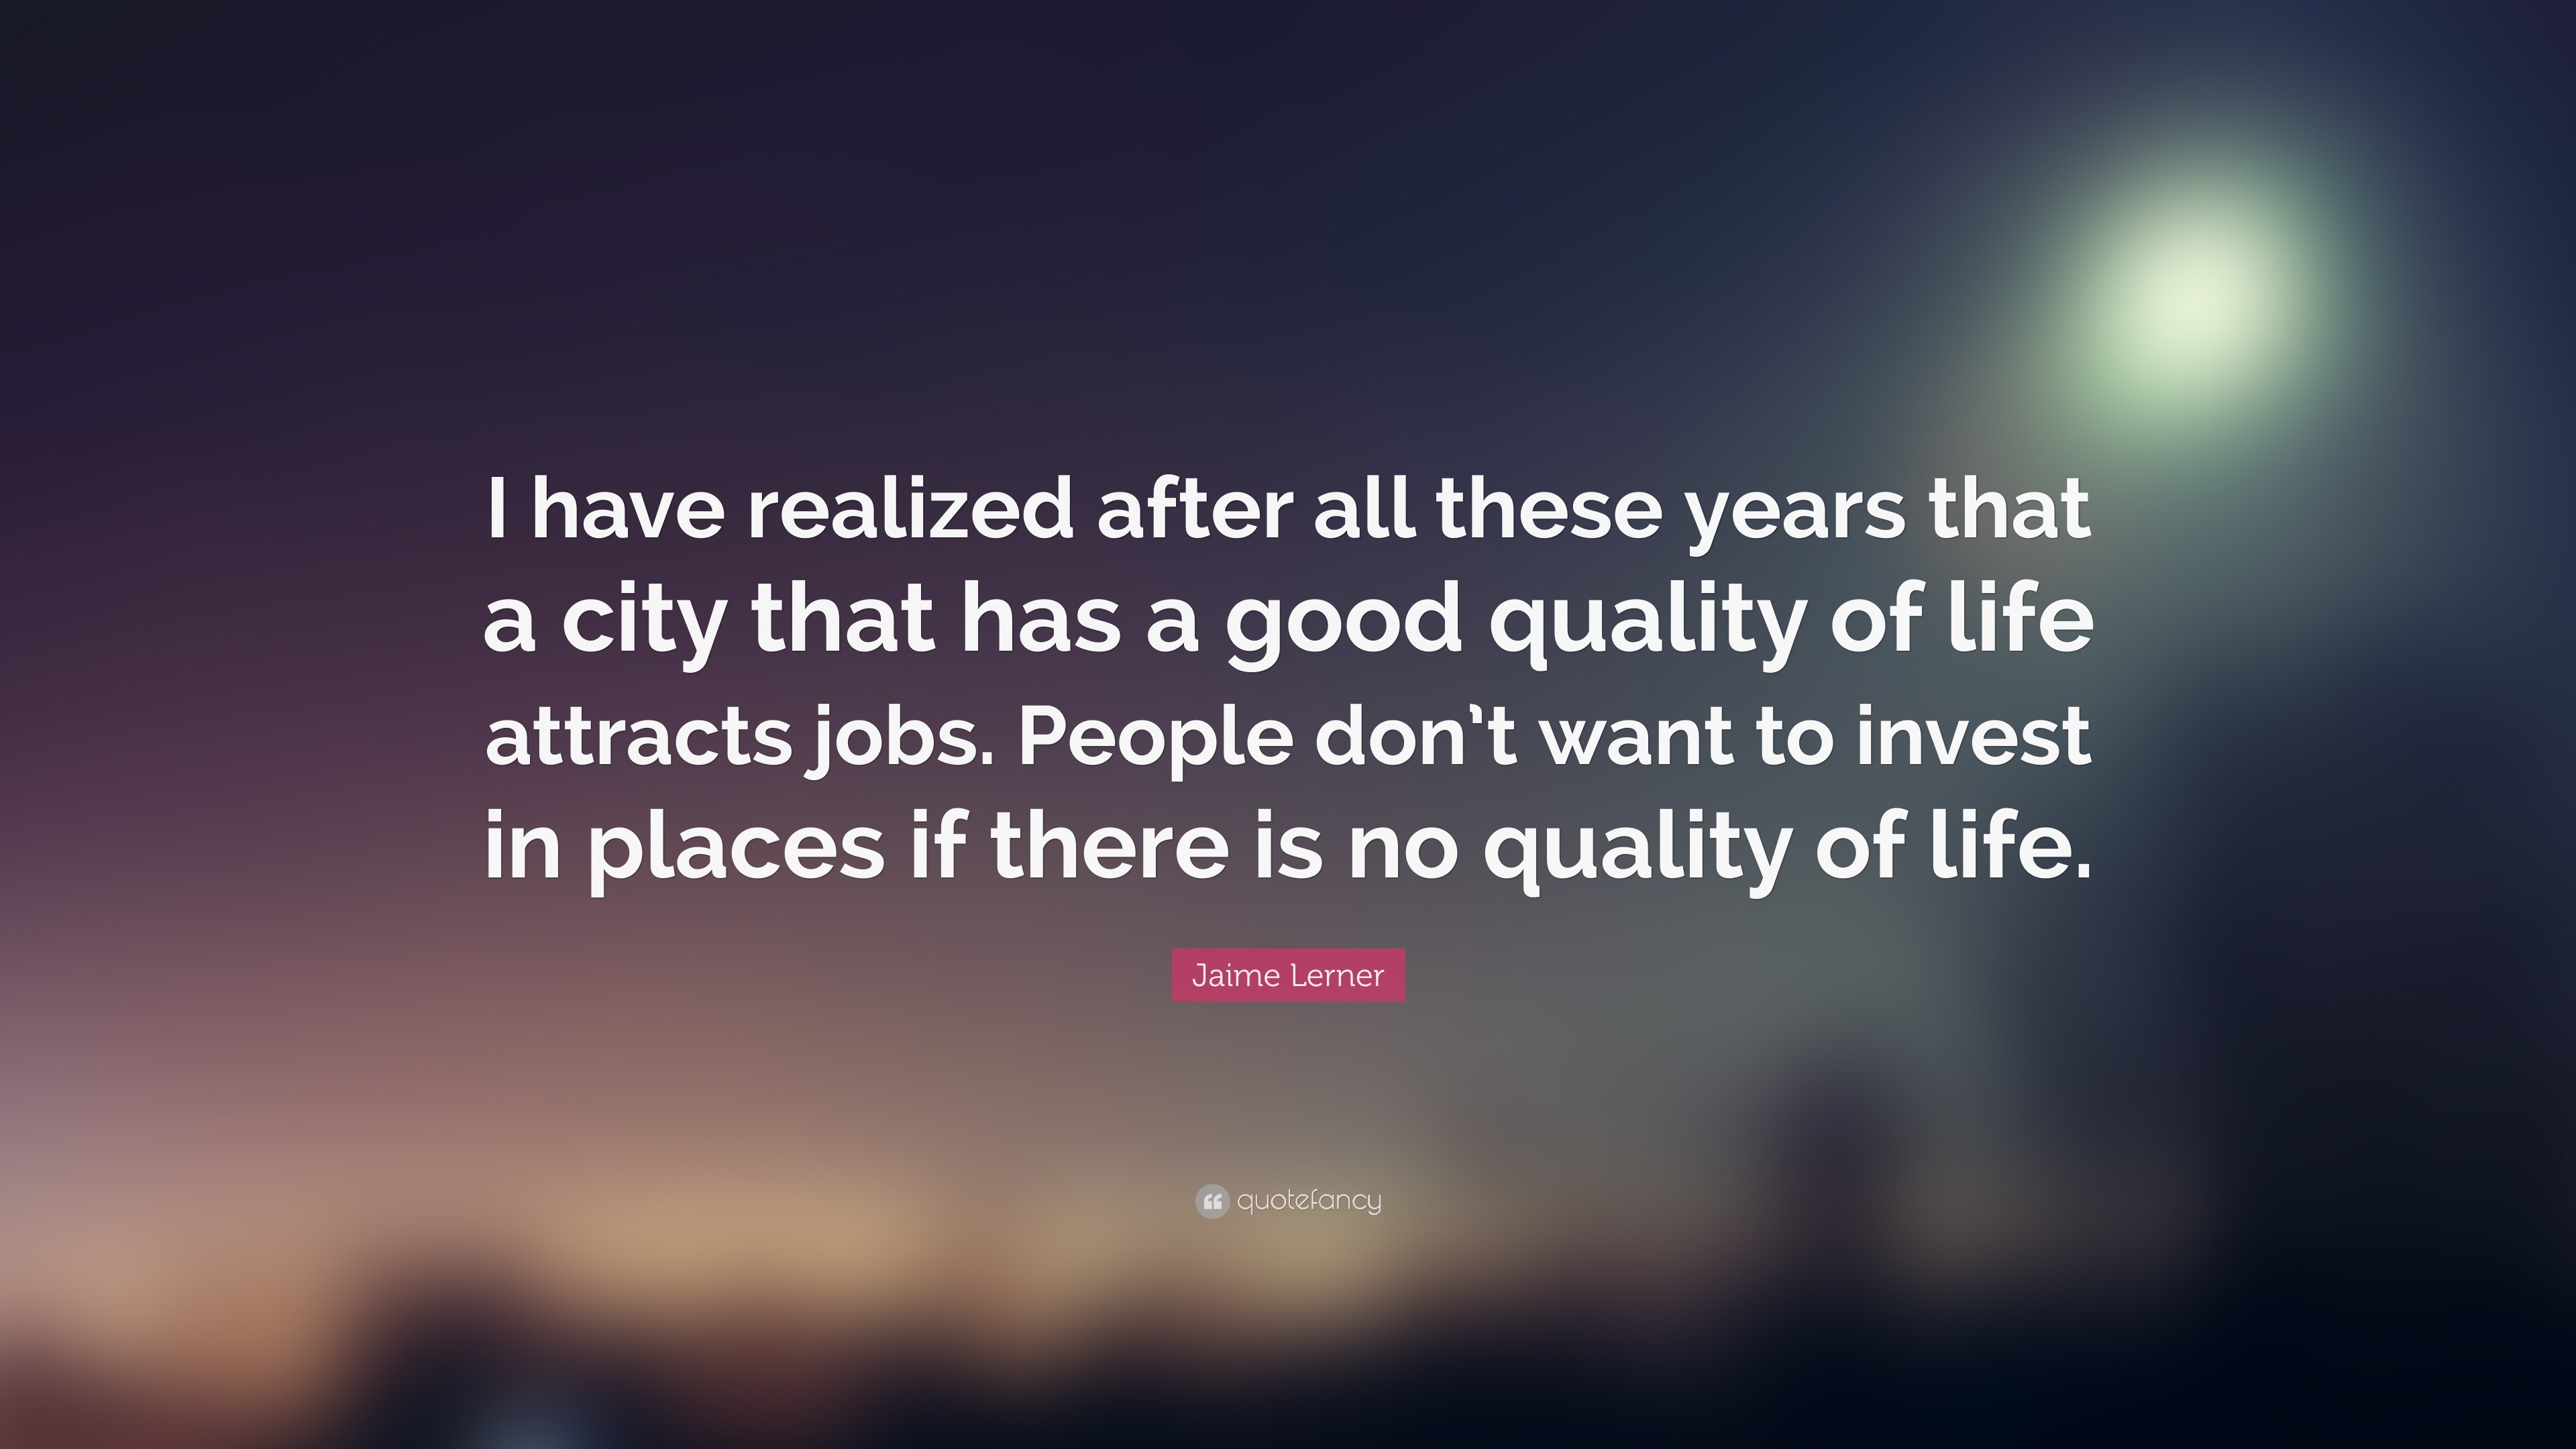 Jaime Lerner Quote I Have Realized After All These Years That A City That Has A Good Quality Of Life Attracts Jobs People Don T Want To In